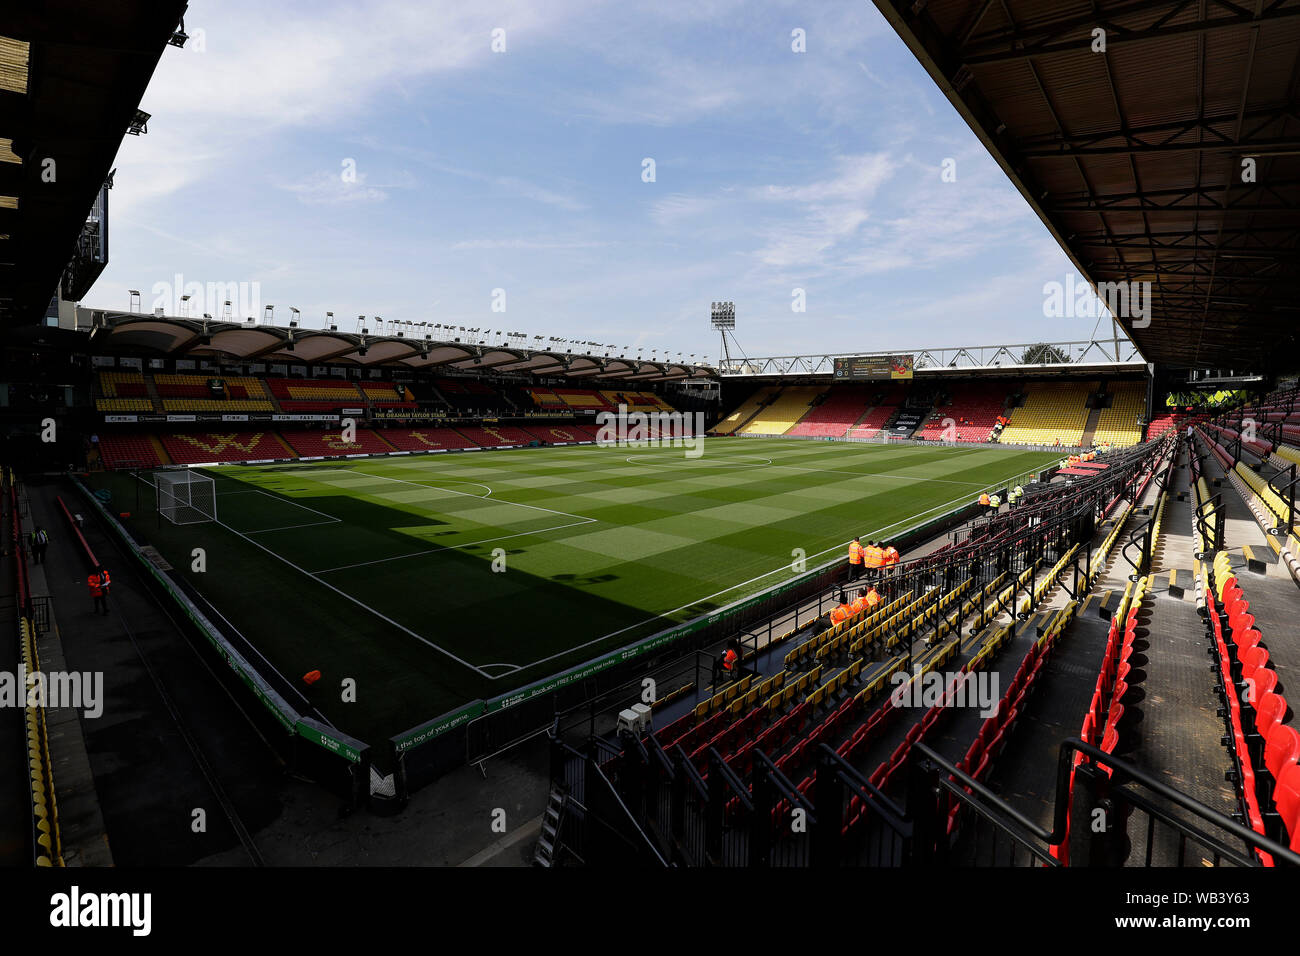 Watford, Hertfordshire, UK. 24th August 2019. Vicarage Road, Watford, Hertfordshire, England; English Premier League Football, Watford Football Club versus West Ham United; General view of Vicarage Road stadium - Strictly Editorial Use Only. No use with unauthorized audio, video, data, fixture lists, club/league logos or 'live' services. Online in-match use limited to 120 images, no video emulation. No use in betting, games or single club/league/player publications Credit: Action Plus Sports Images/Alamy Live News Credit: Action Plus Sports Images/Alamy Live News Stock Photo